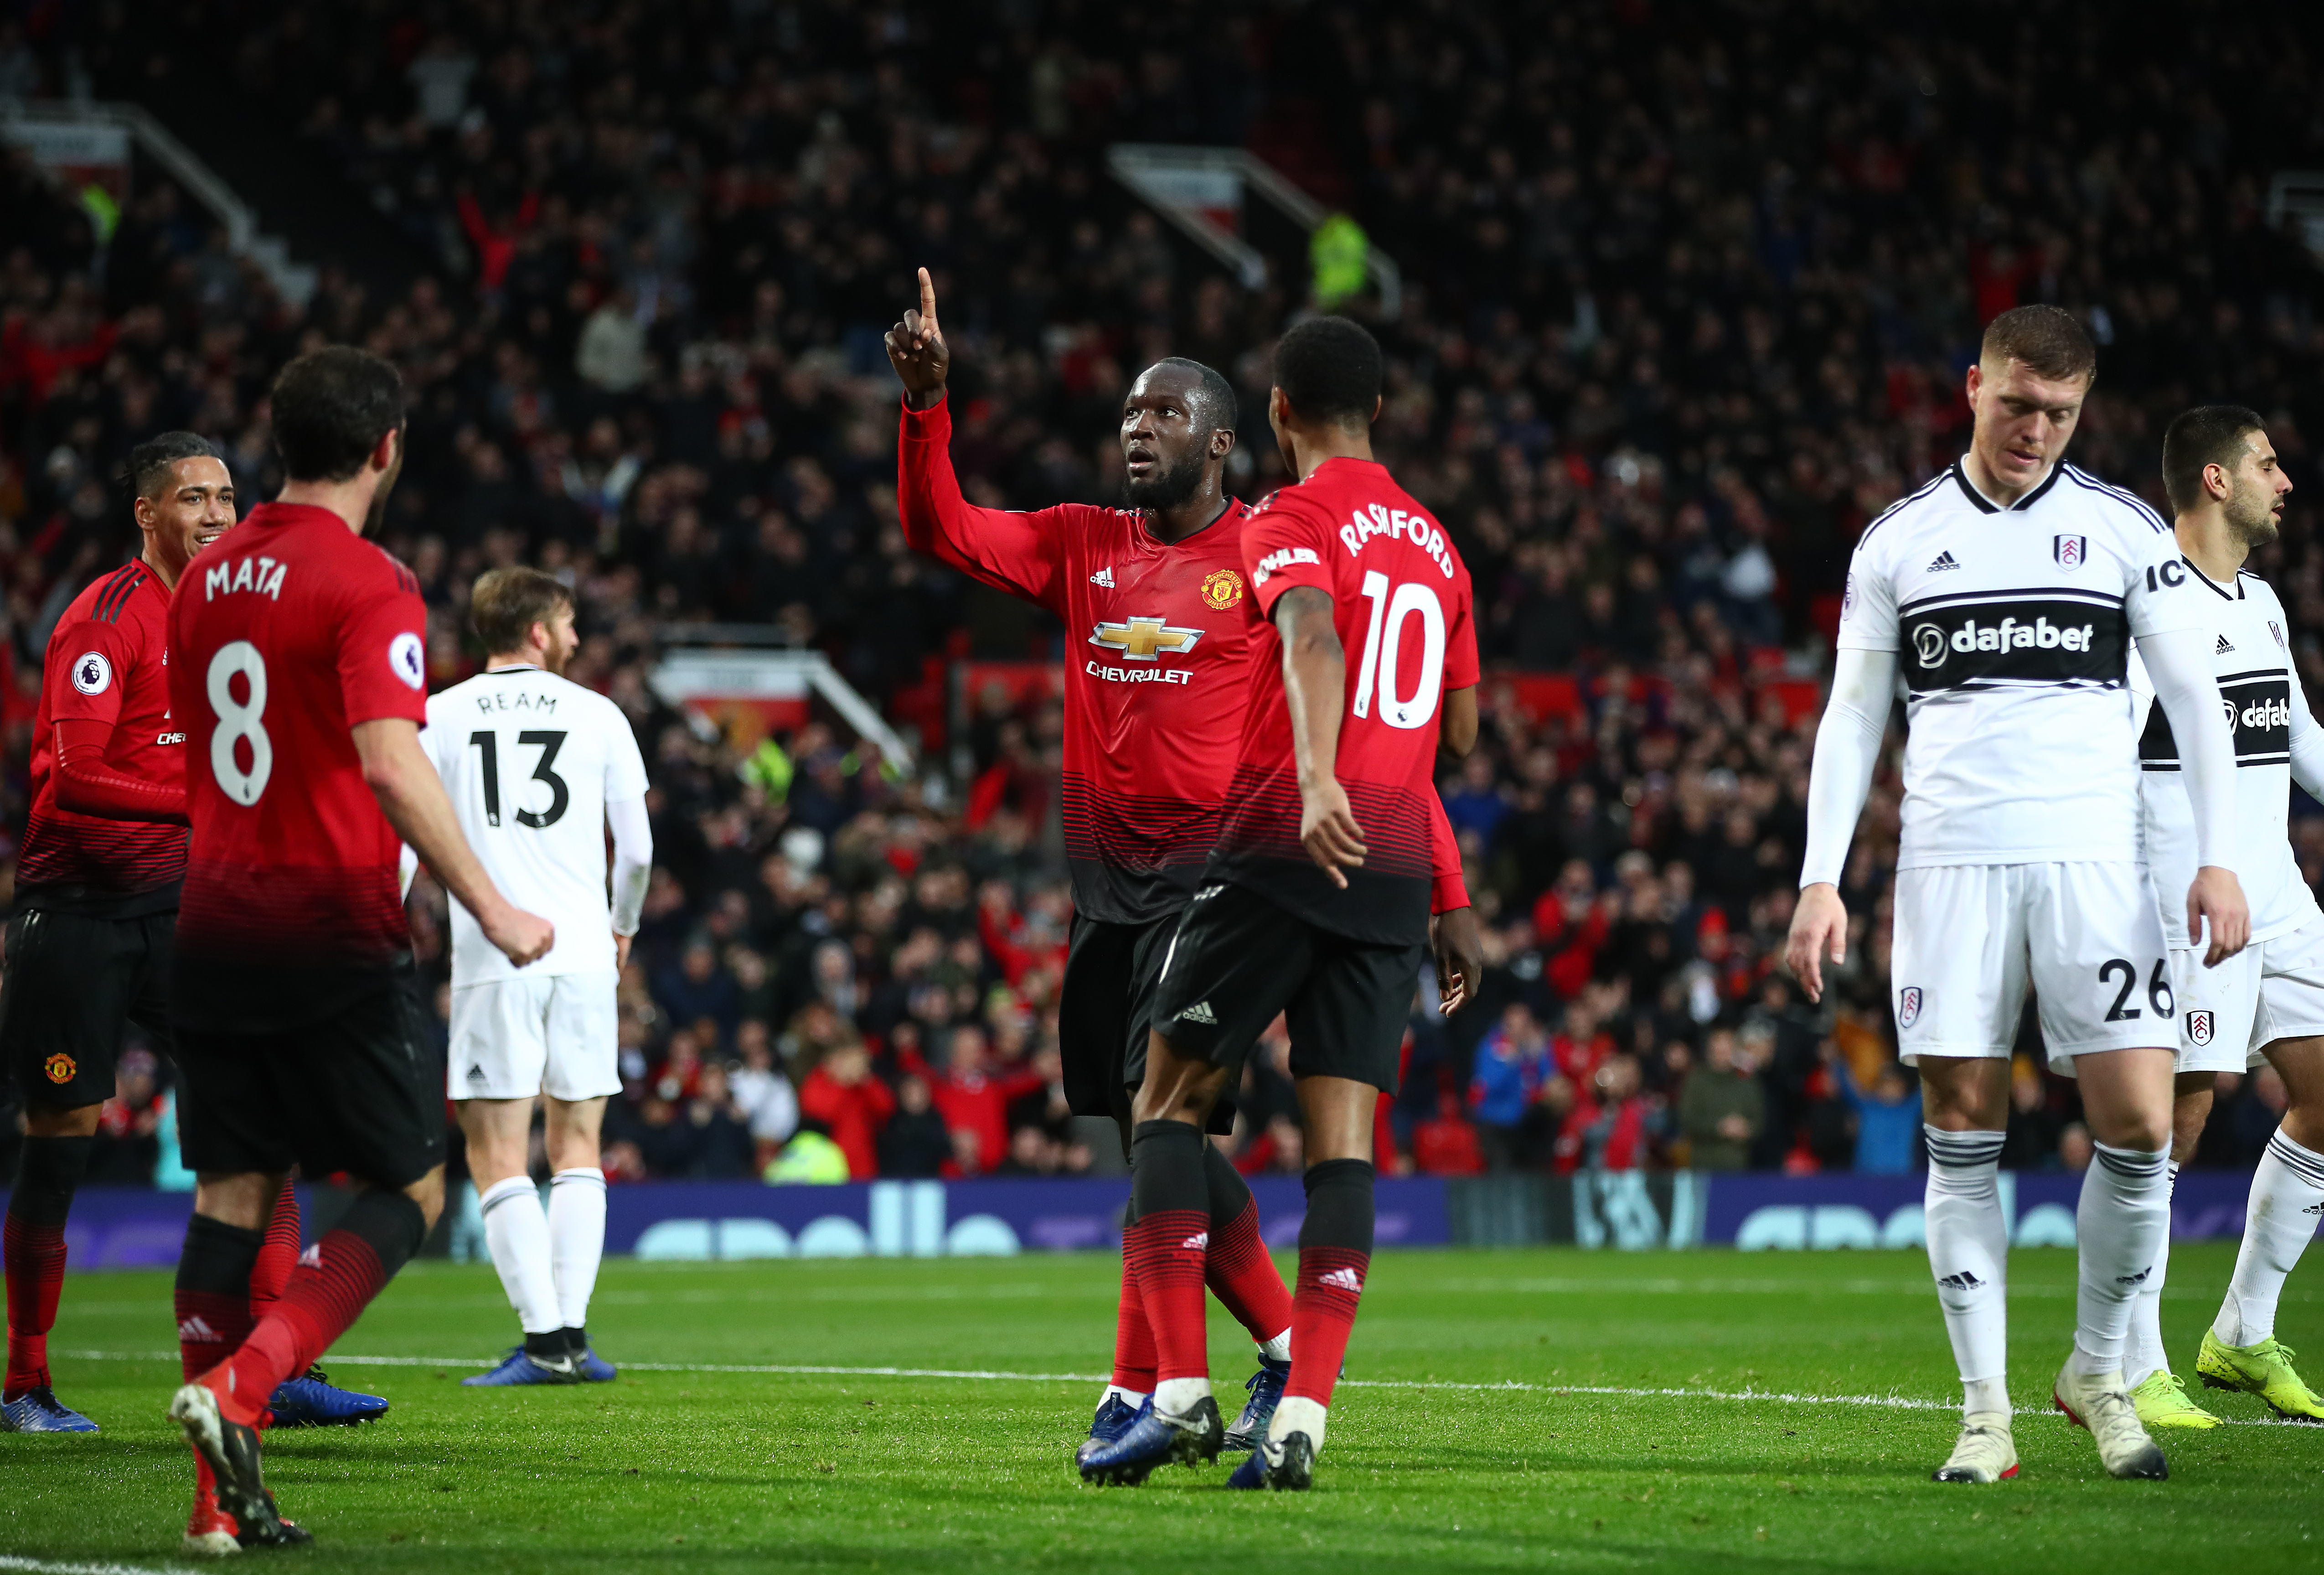 MANCHESTER, ENGLAND - DECEMBER 08: Romelu Lukaku of Manchester United celebrates after scoring his team's third goal with Juan Mata and Marcus Rashford of Manchester United during the Premier League match between Manchester United and Fulham FC at Old Trafford on December 08, 2018 in Manchester, United Kingdom. (Photo by Clive Brunskill/Getty Images)